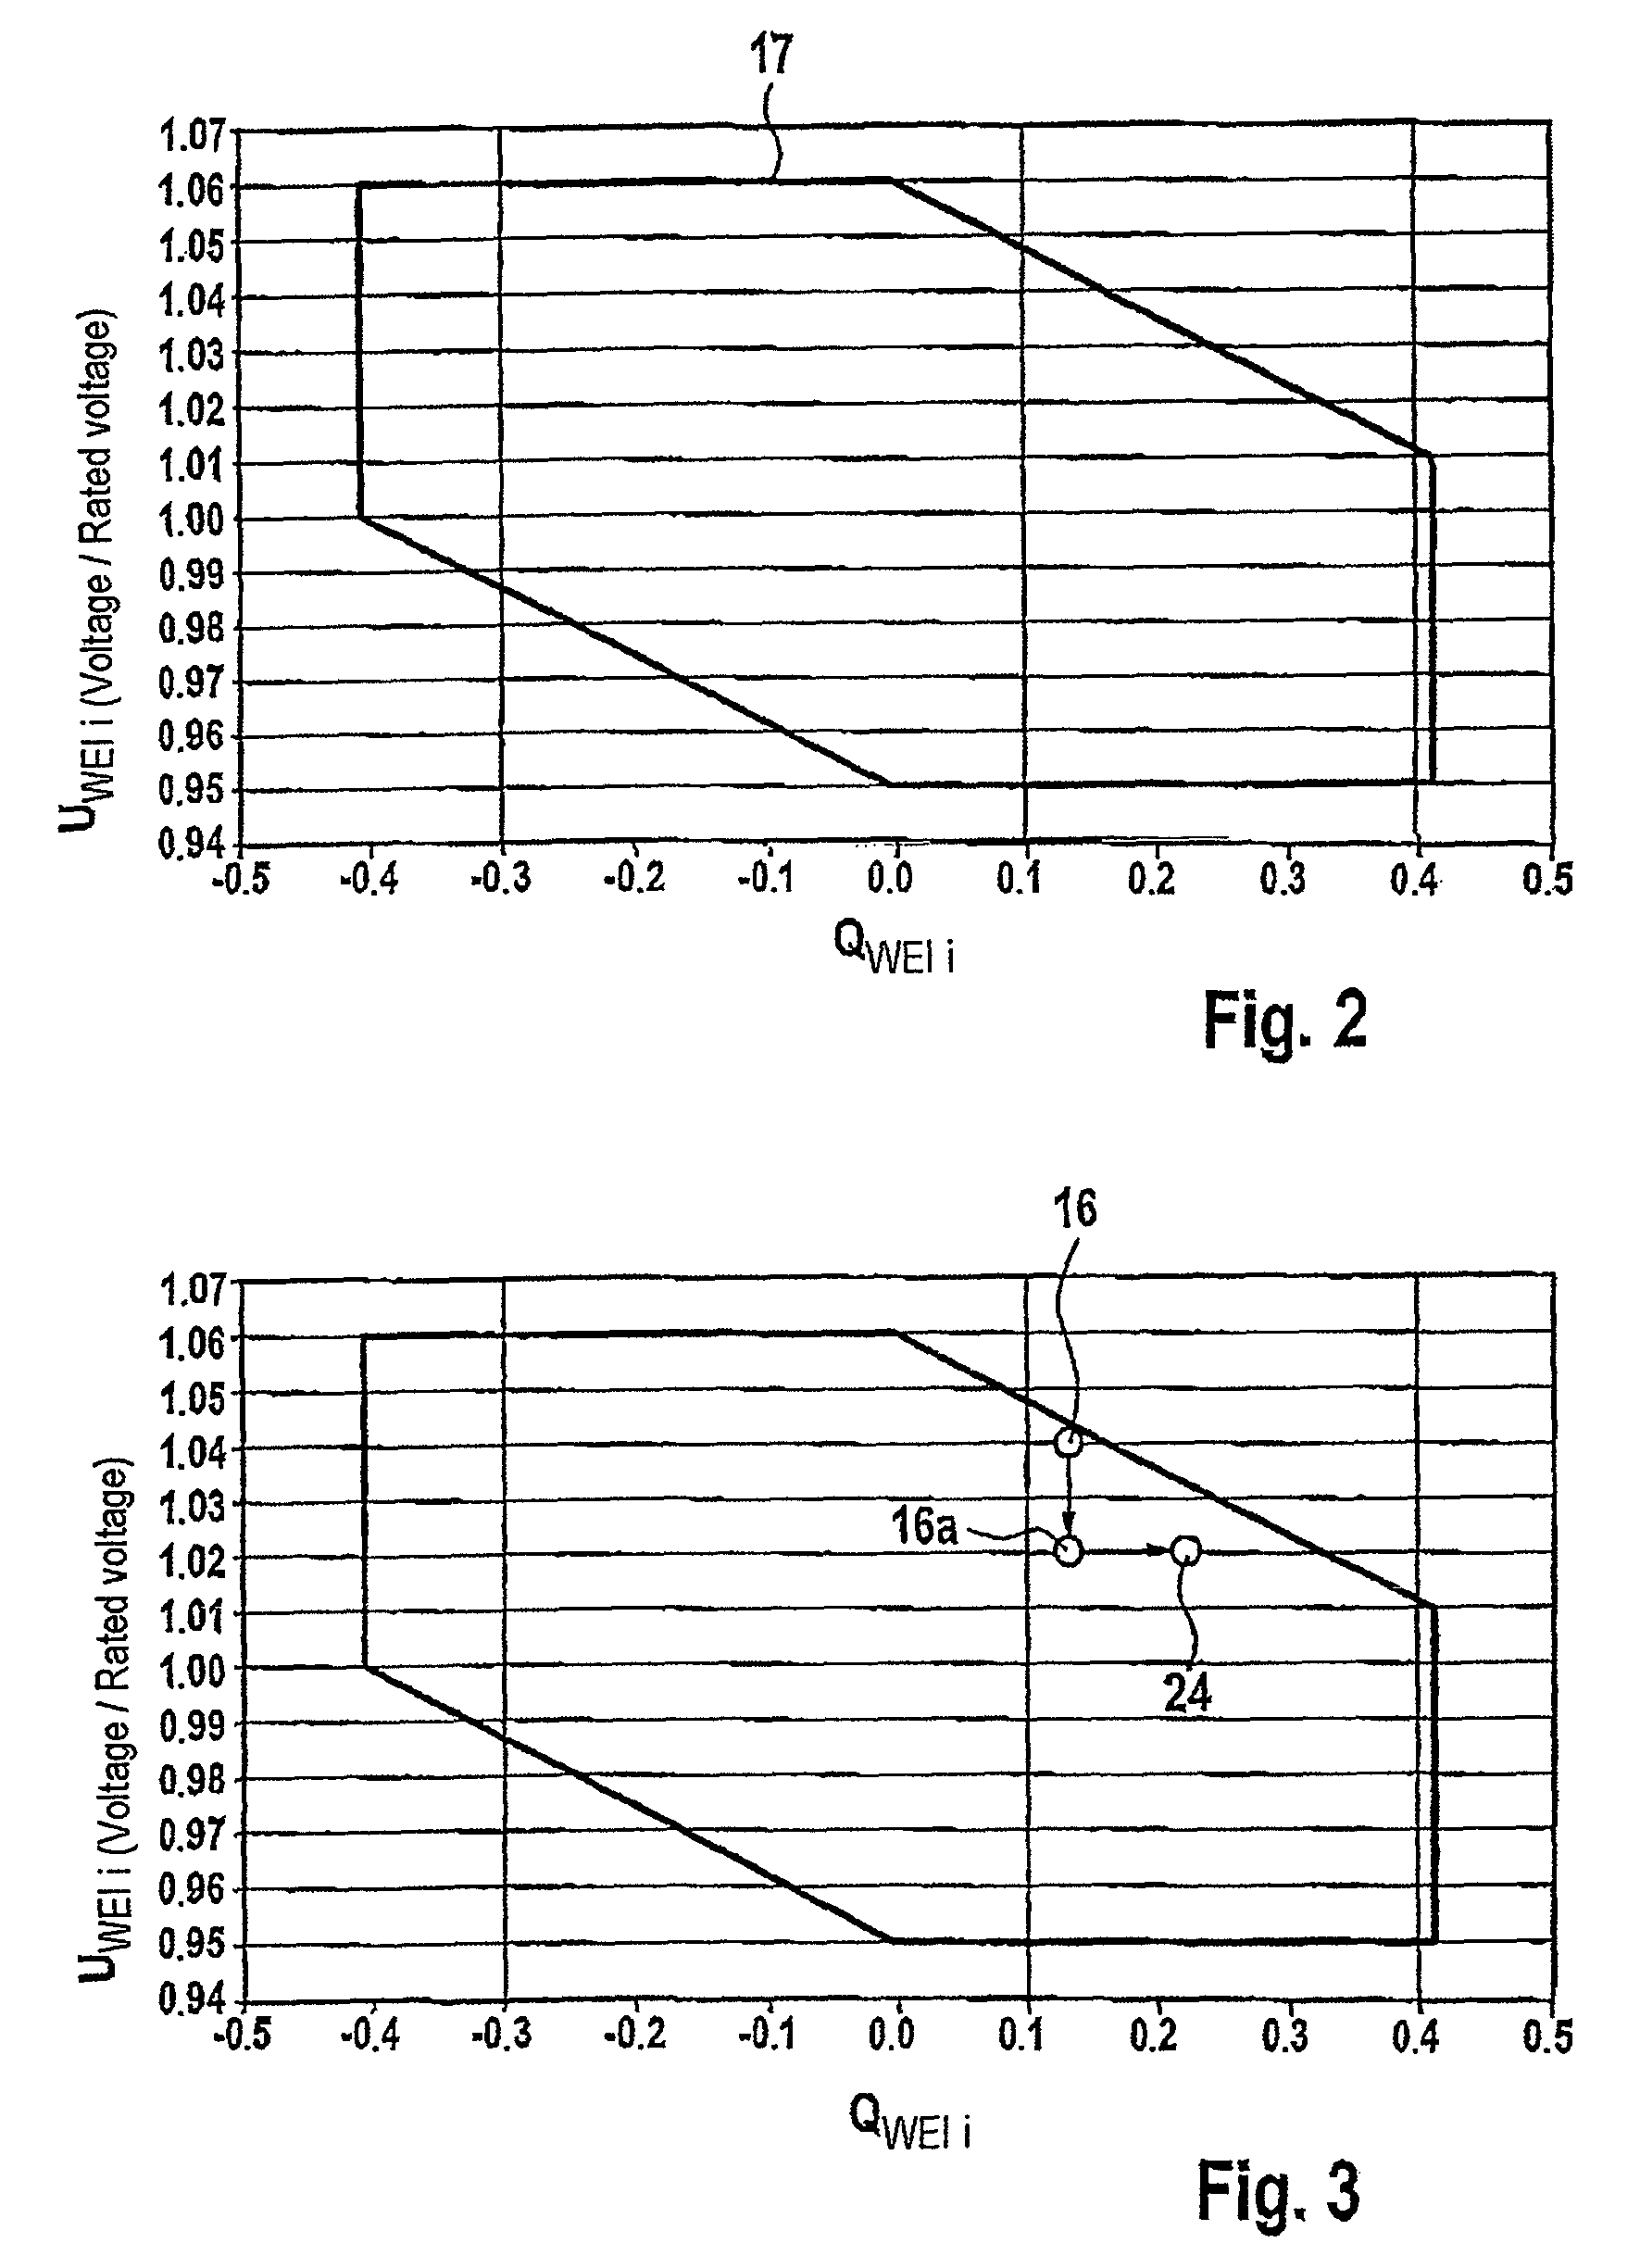 Wind farm and method for operation of a wind farm